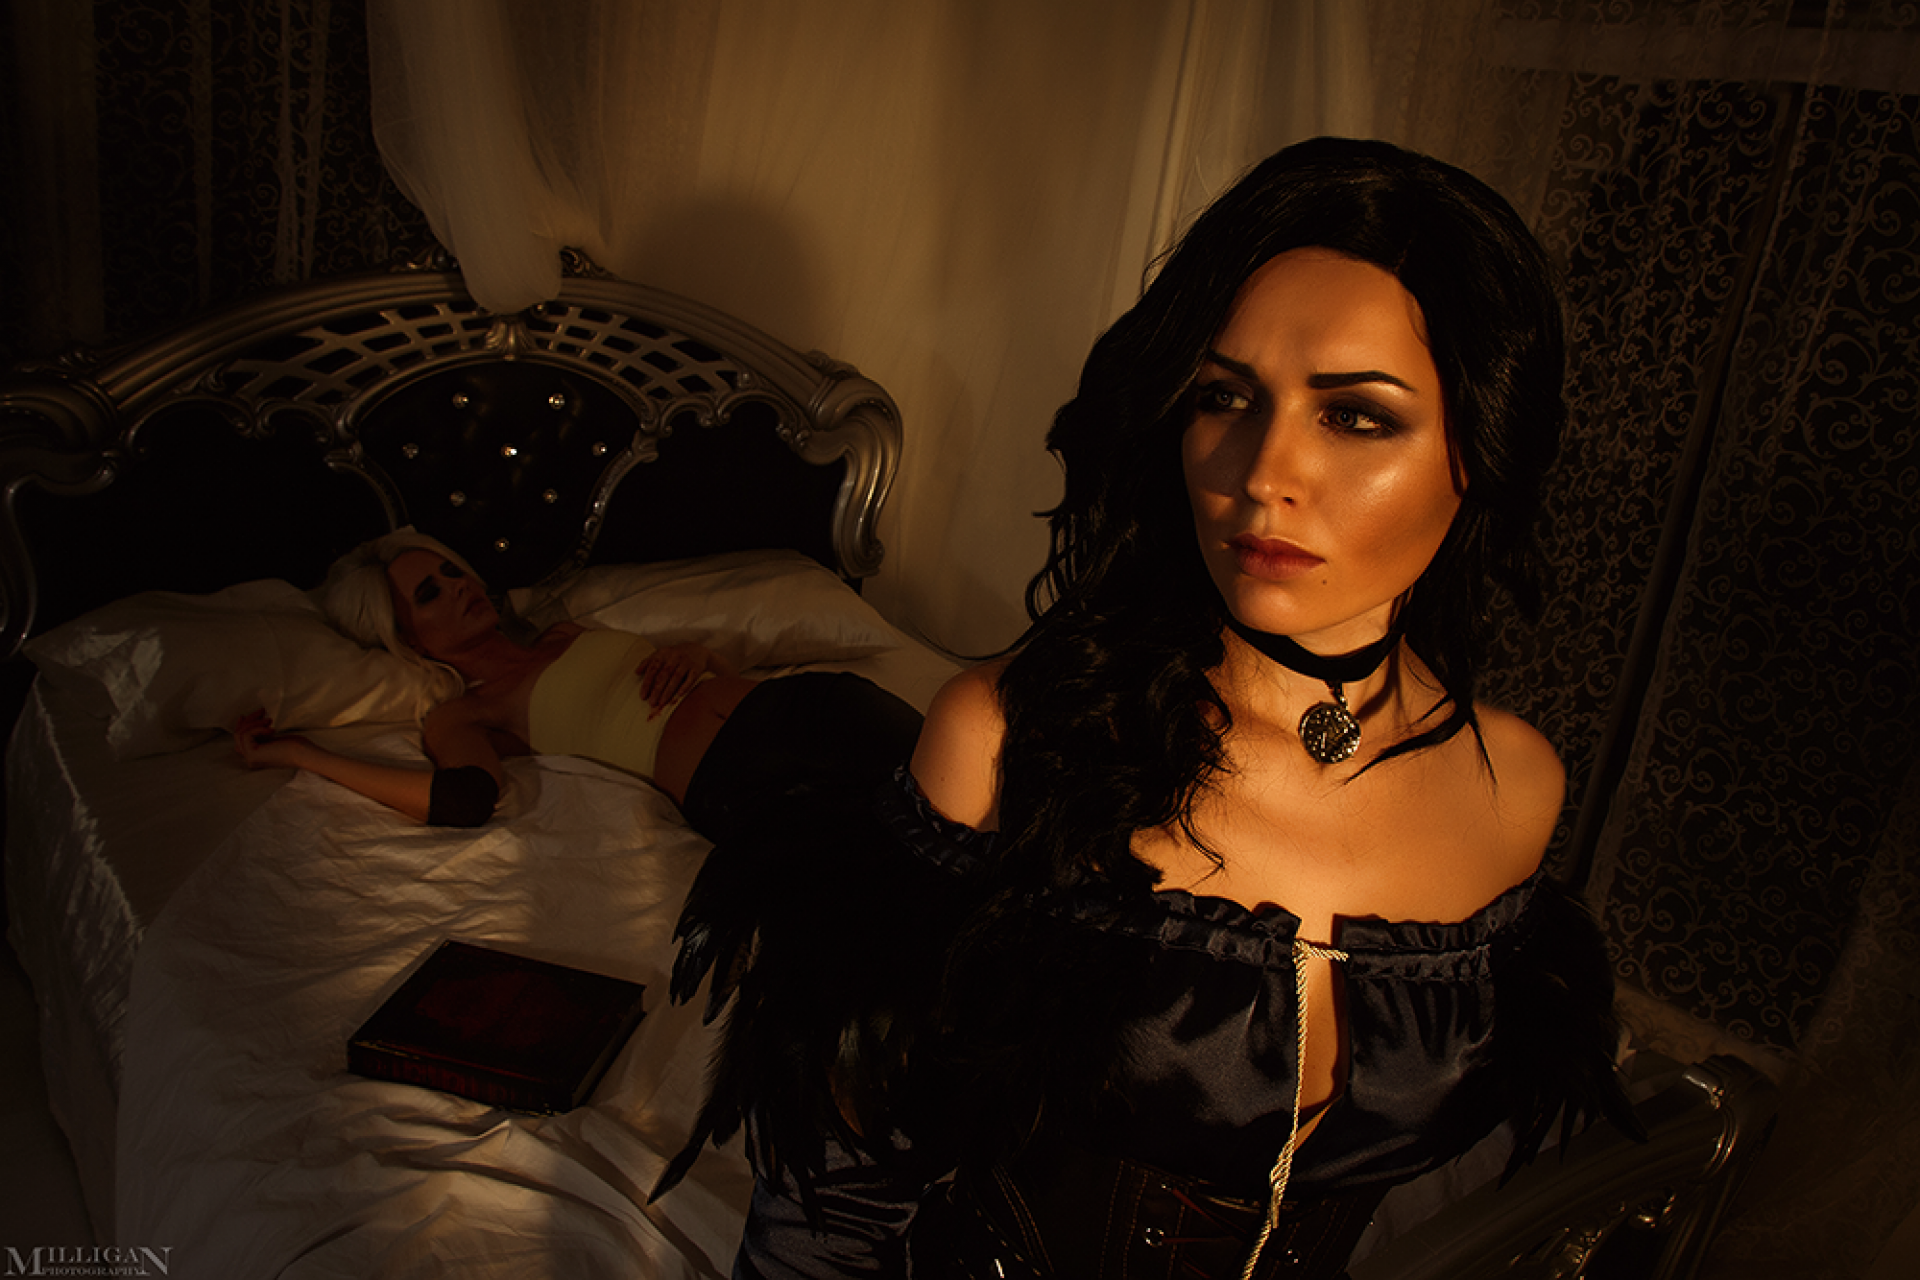 Cosplayer in Image of a Character Yennefer of Vengerberg from the Game or  Film the Witcher in Winter Forest at Sunset Editorial Stock Photo - Image  of dnipro, netflix: 172111433